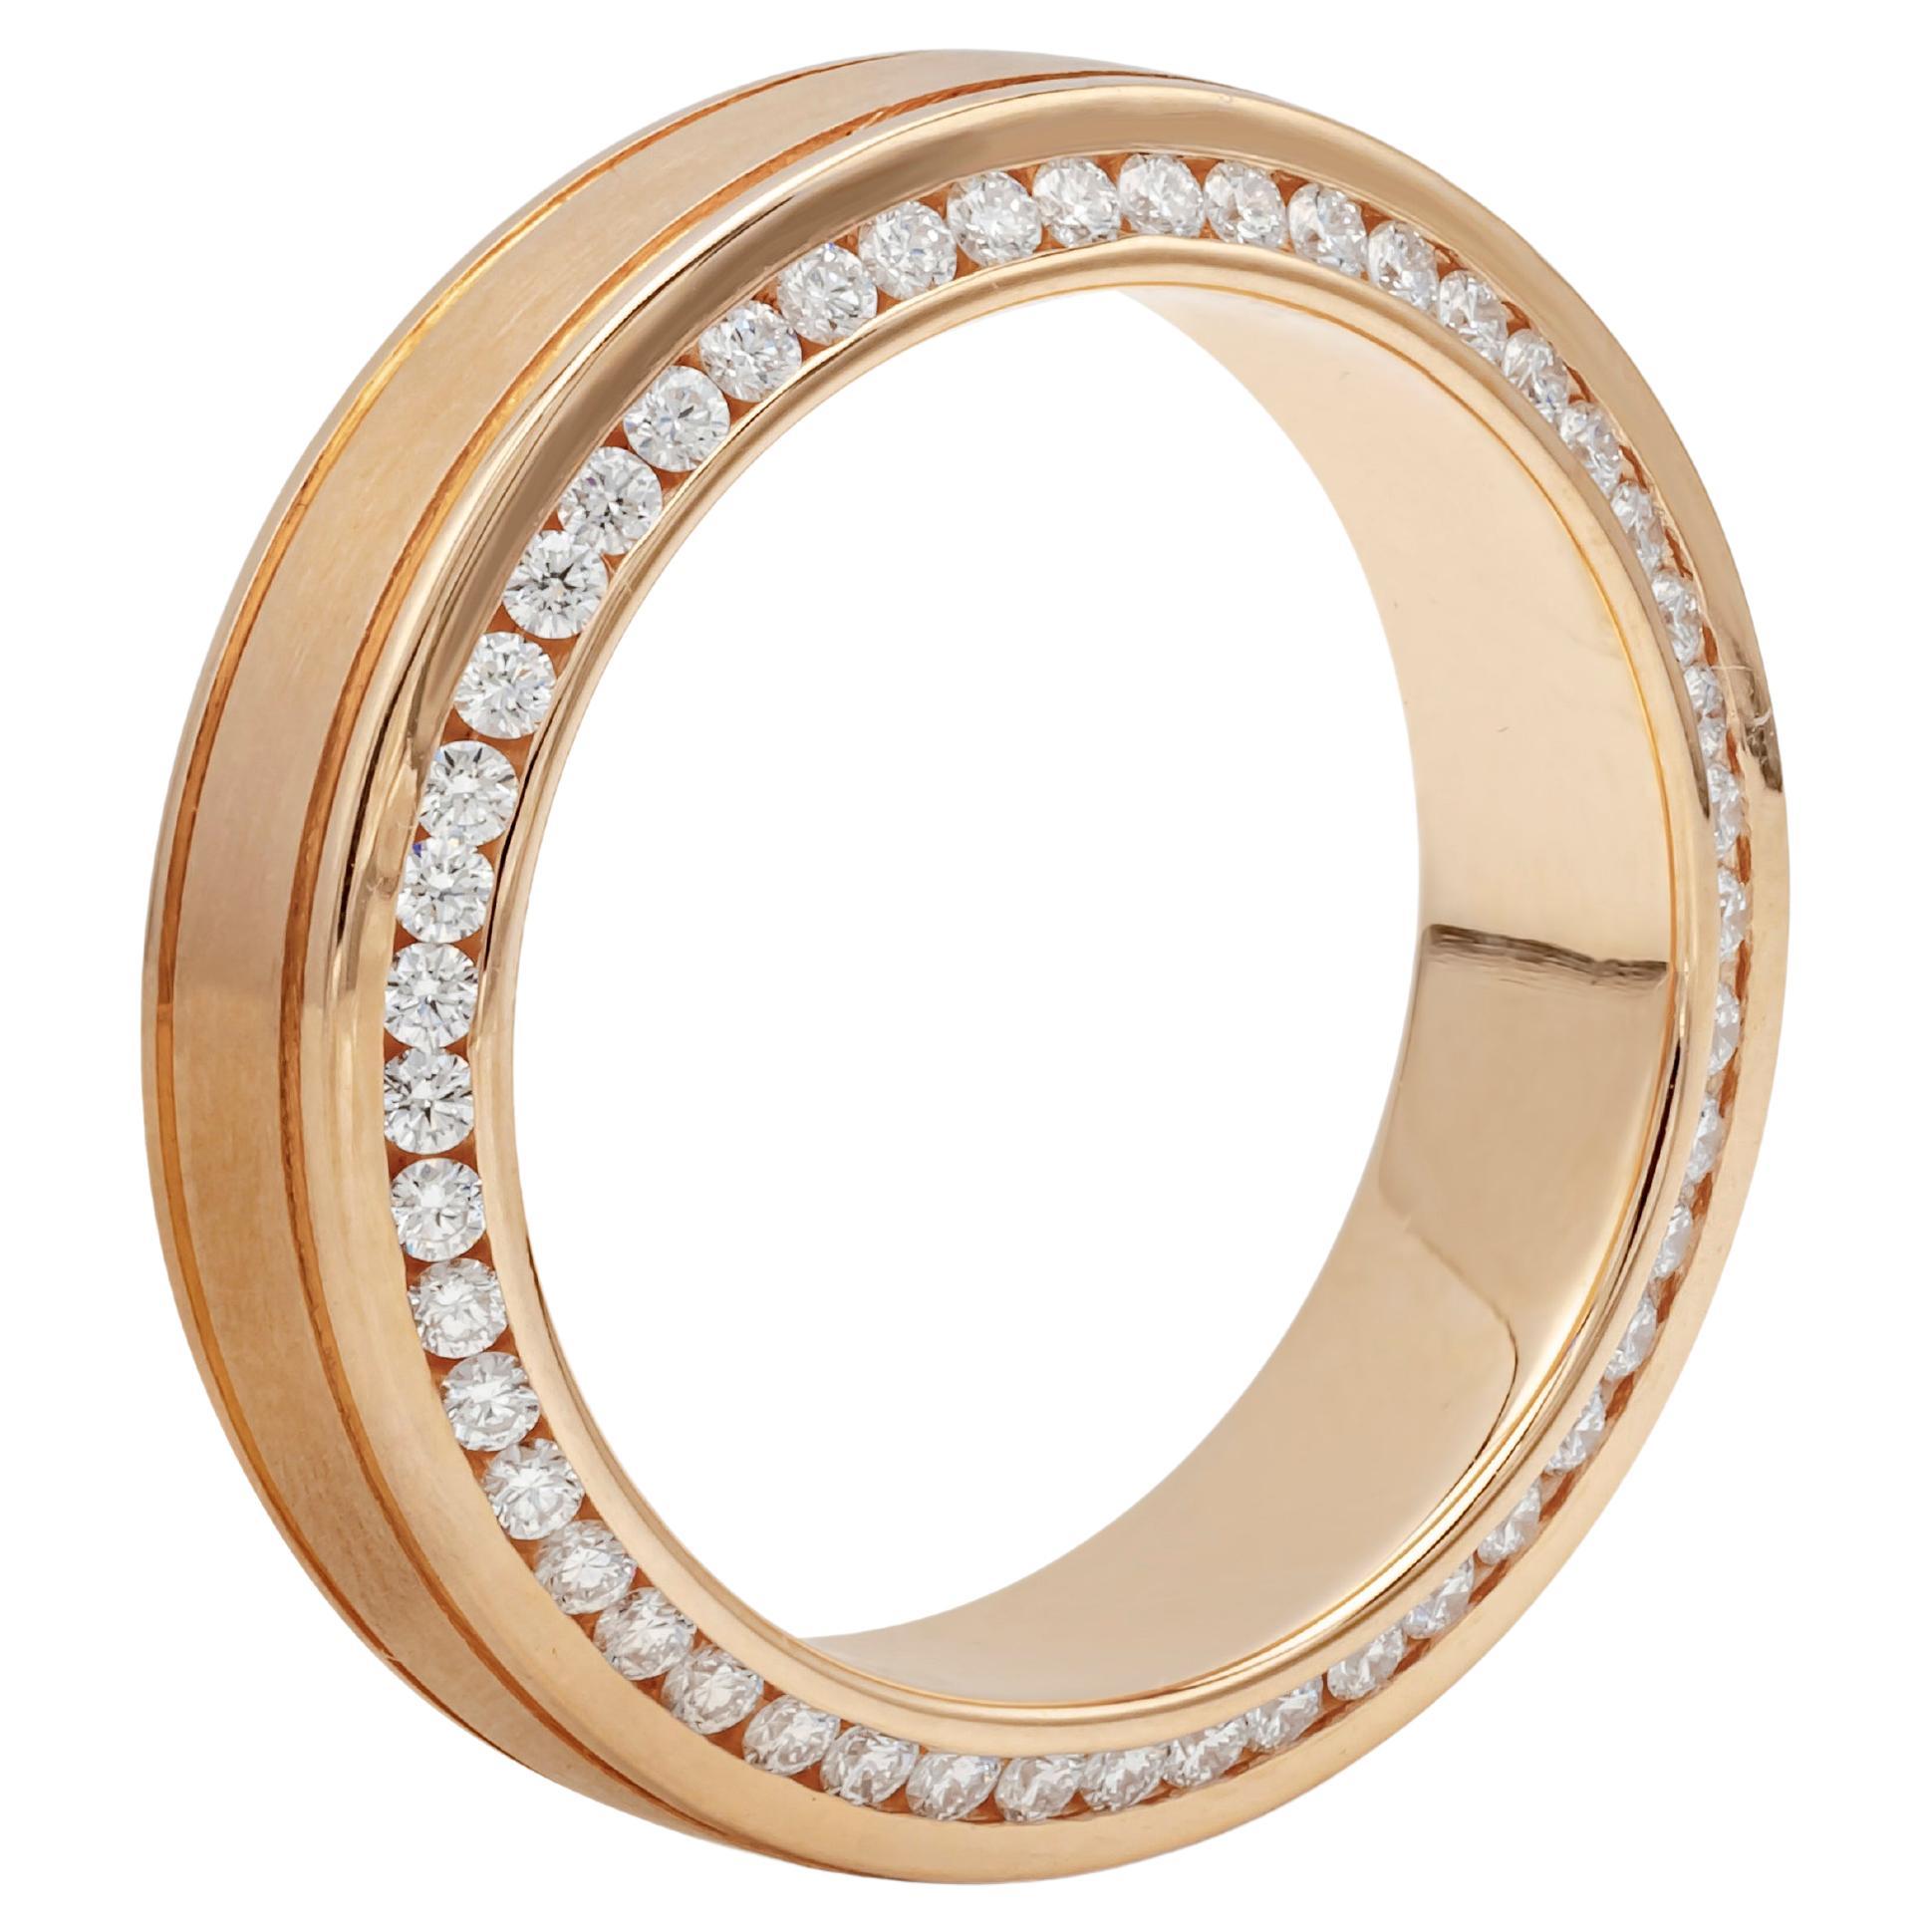 1.21 Carats Total Brilliant Round Diamond Men's Wedding Band in Rose Gold